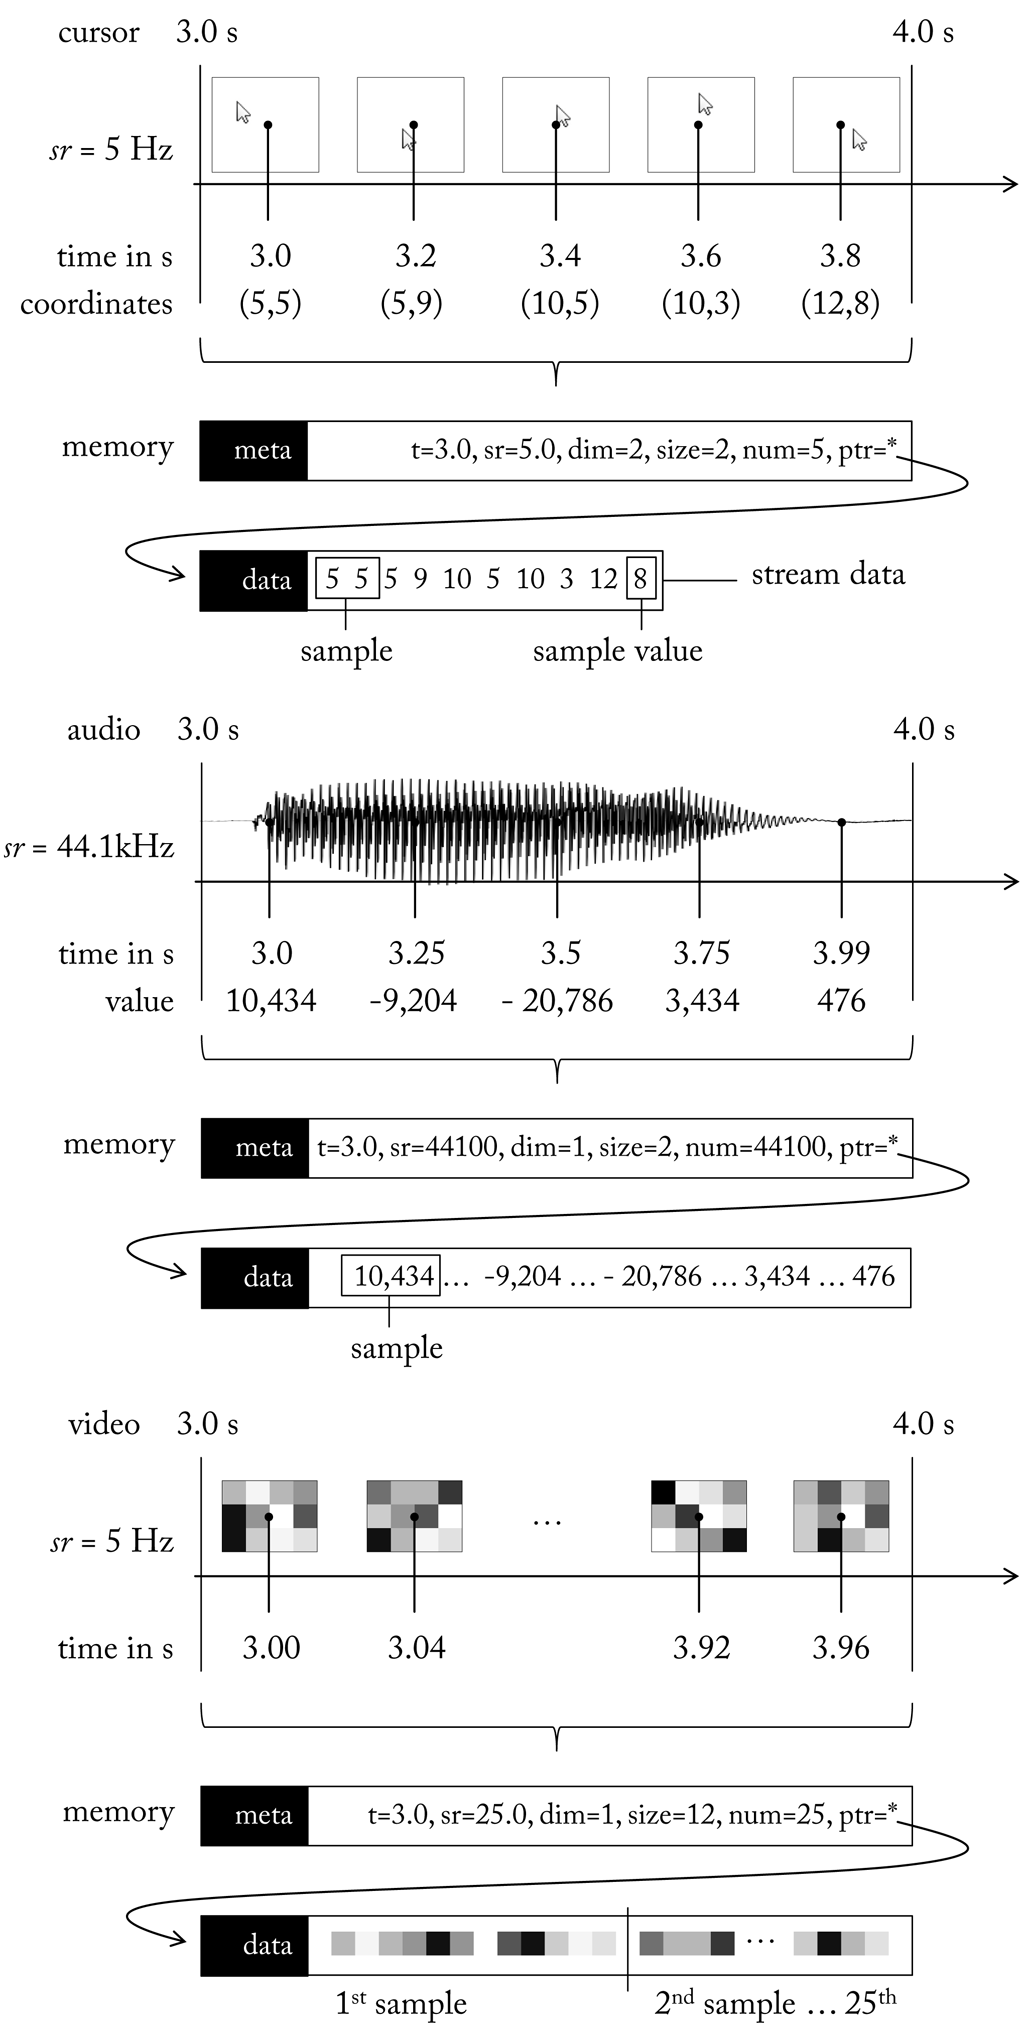 Examples of different quantities and how they are stored in SSI: a cursor signal, an audio chunk, and a video stream.